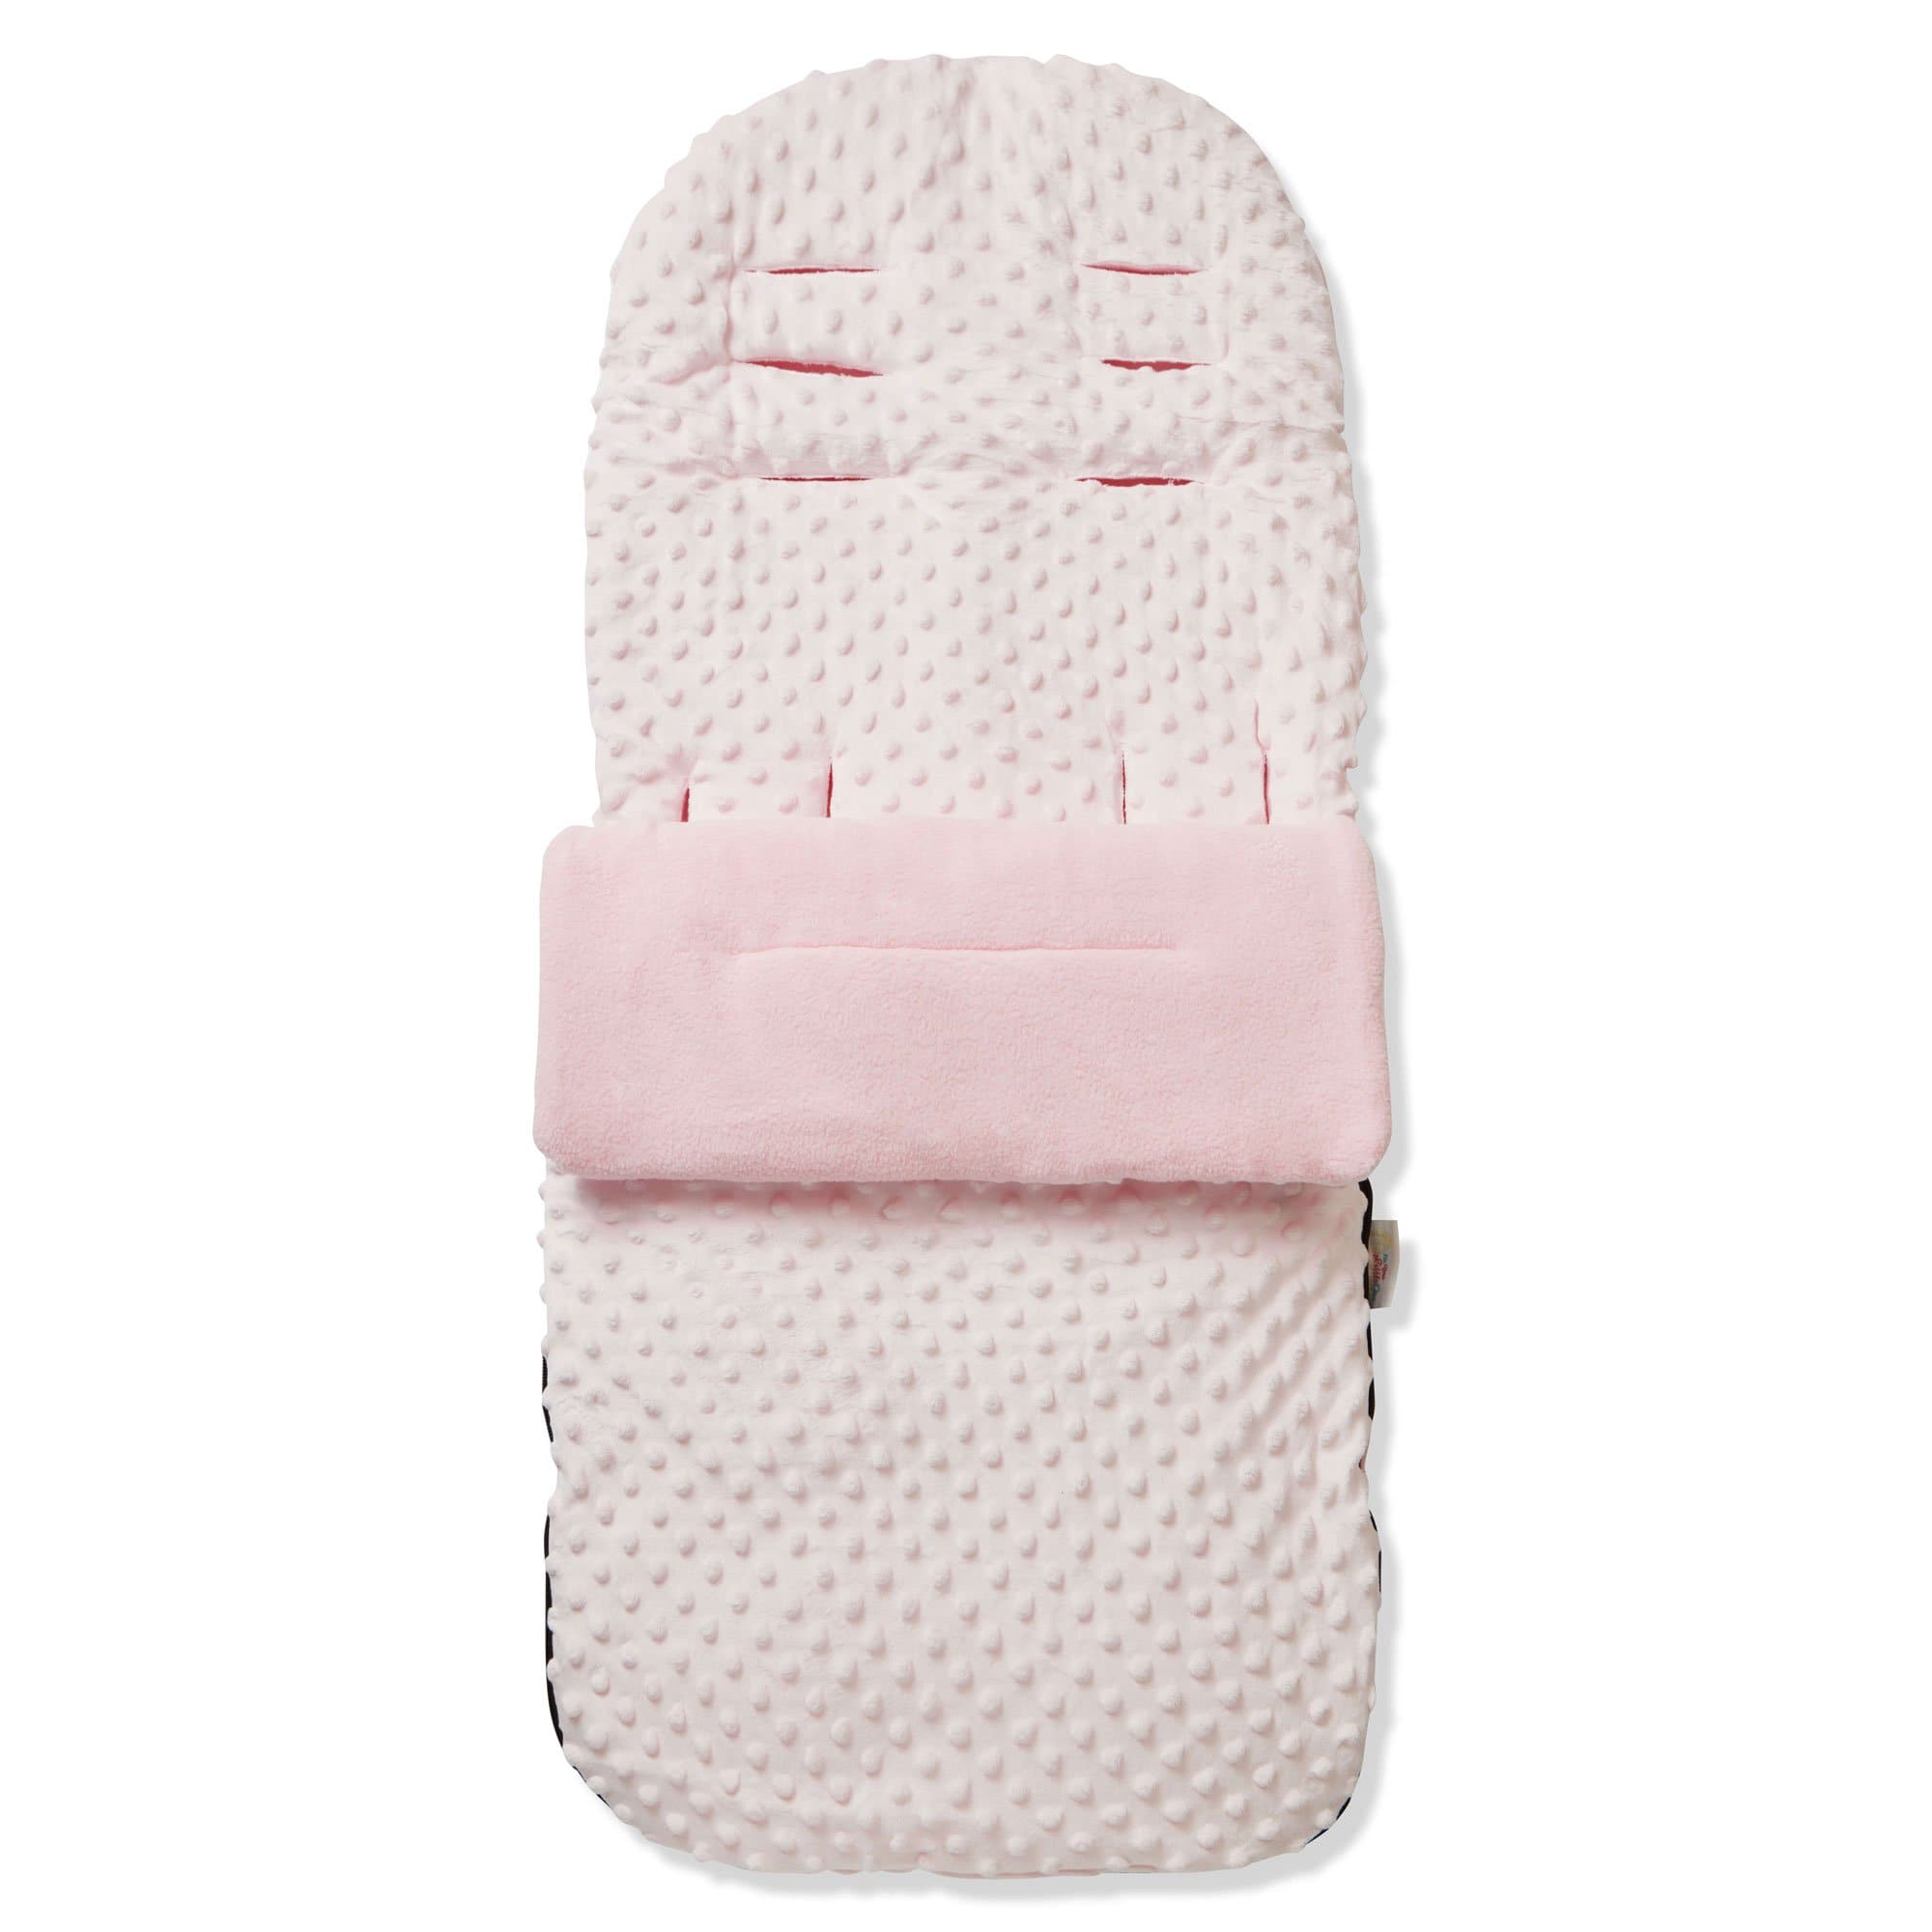 Dimple Footmuff / Cosy Toes Compatible with iCandy - For Your Little One